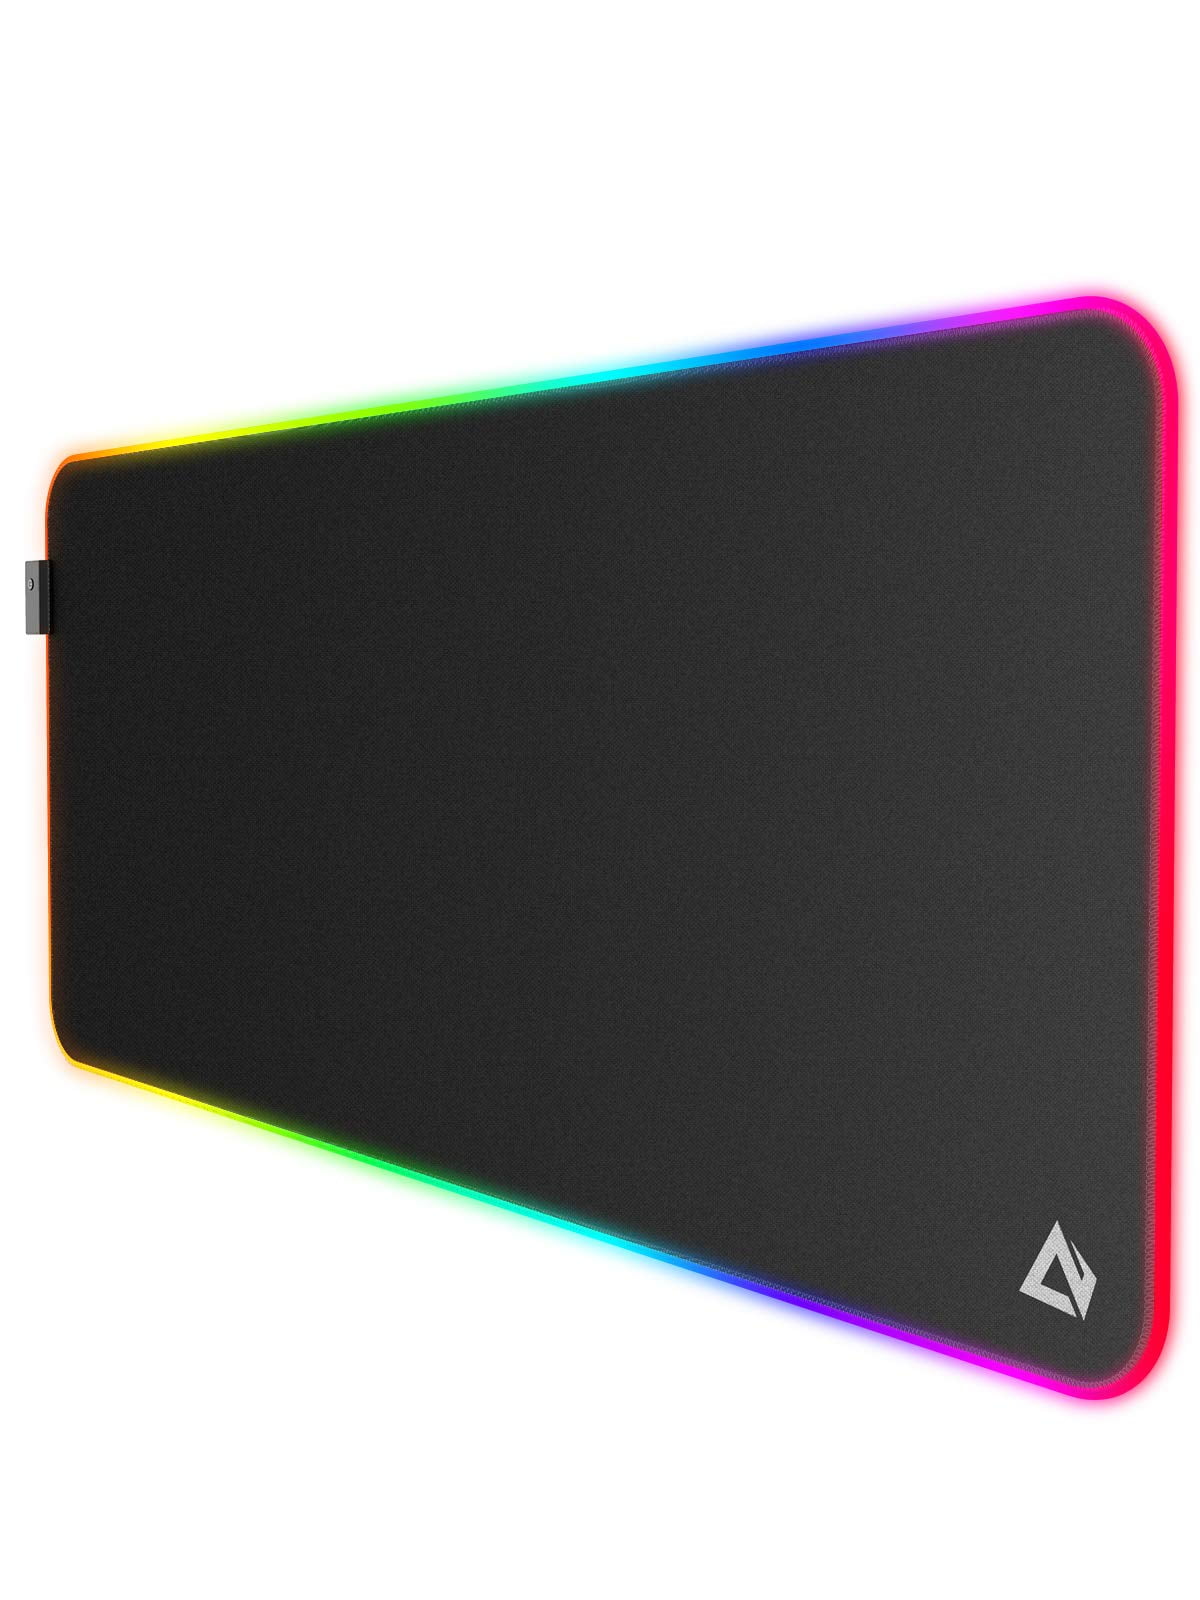 Size_3 800X400X4Mm Game Mouse Pads RGB Wired Lighting Gamers Anime Mouse Pad Keyboard Colorful Glowing Pc Pad Anime Pad